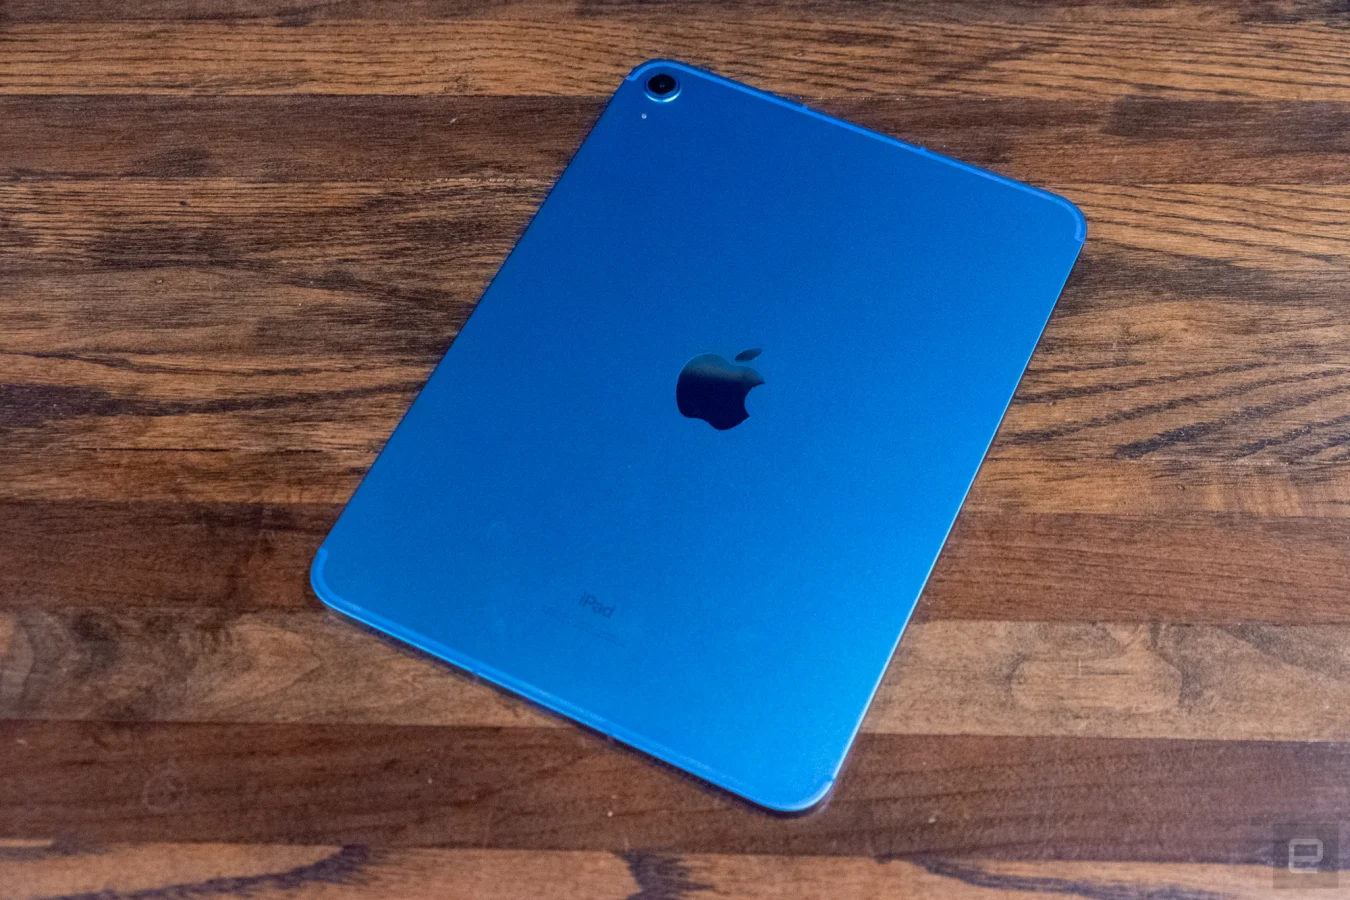 Apple’s redesigned iPad is mostly worth the higher price